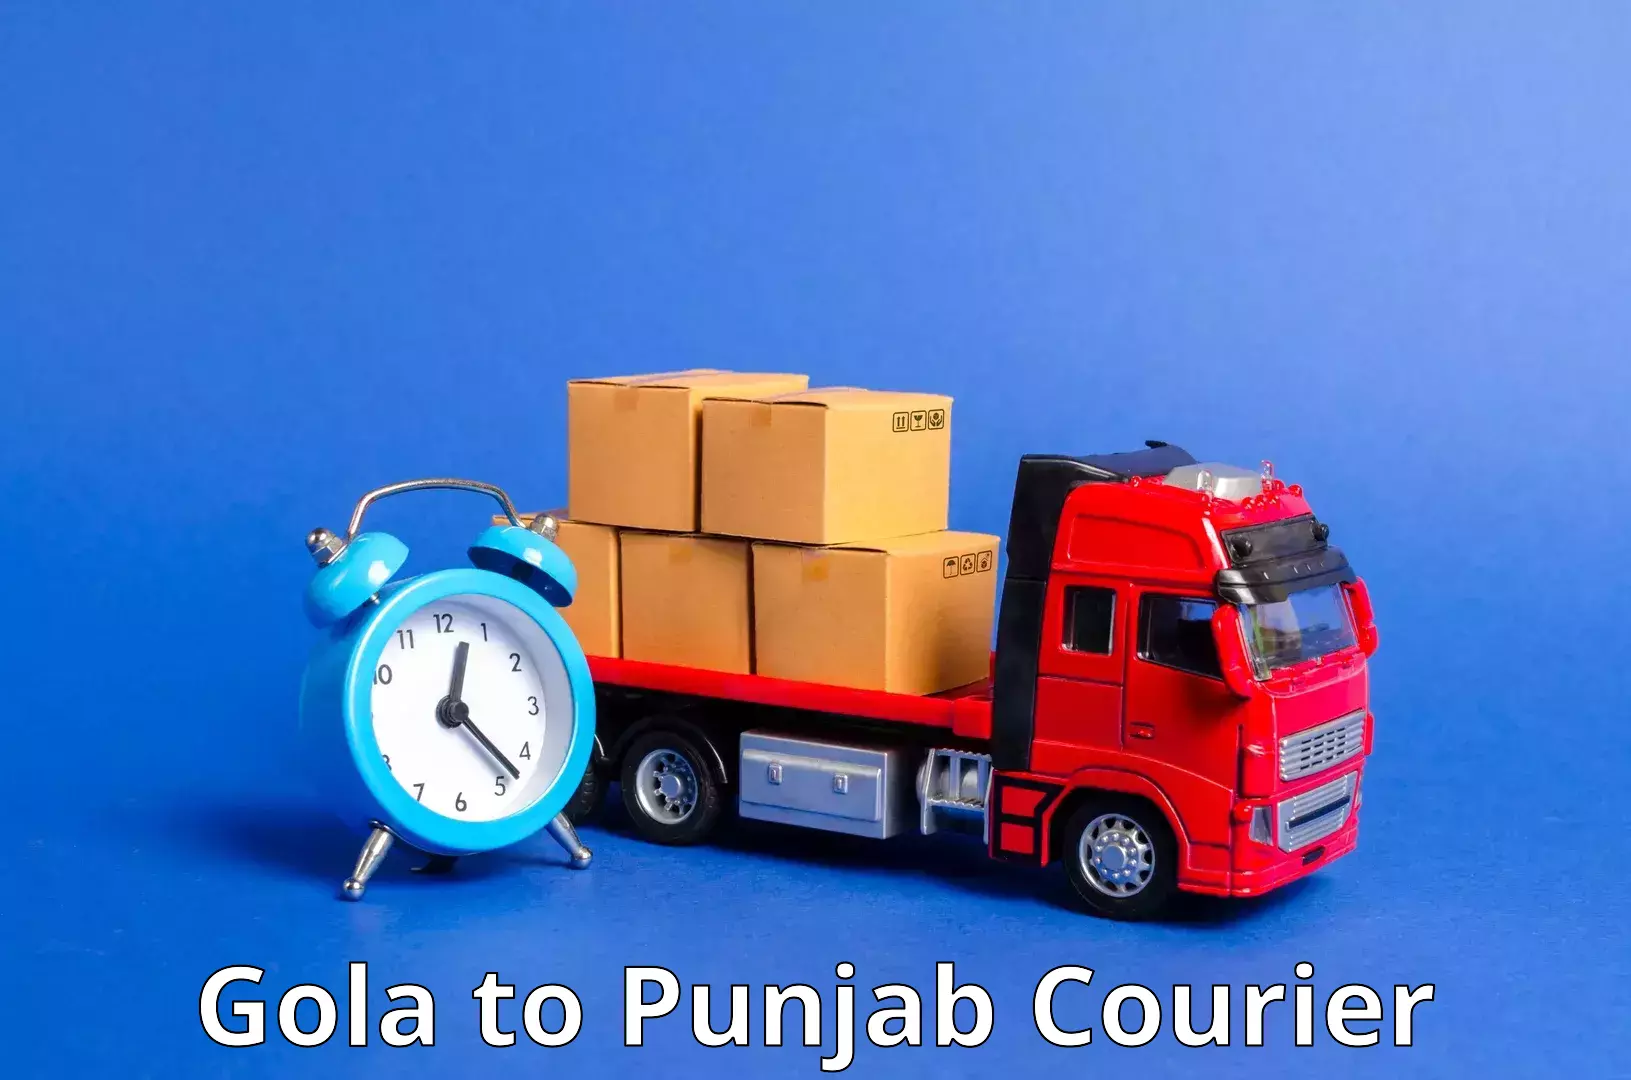 Scheduled delivery in Gola to Punjab